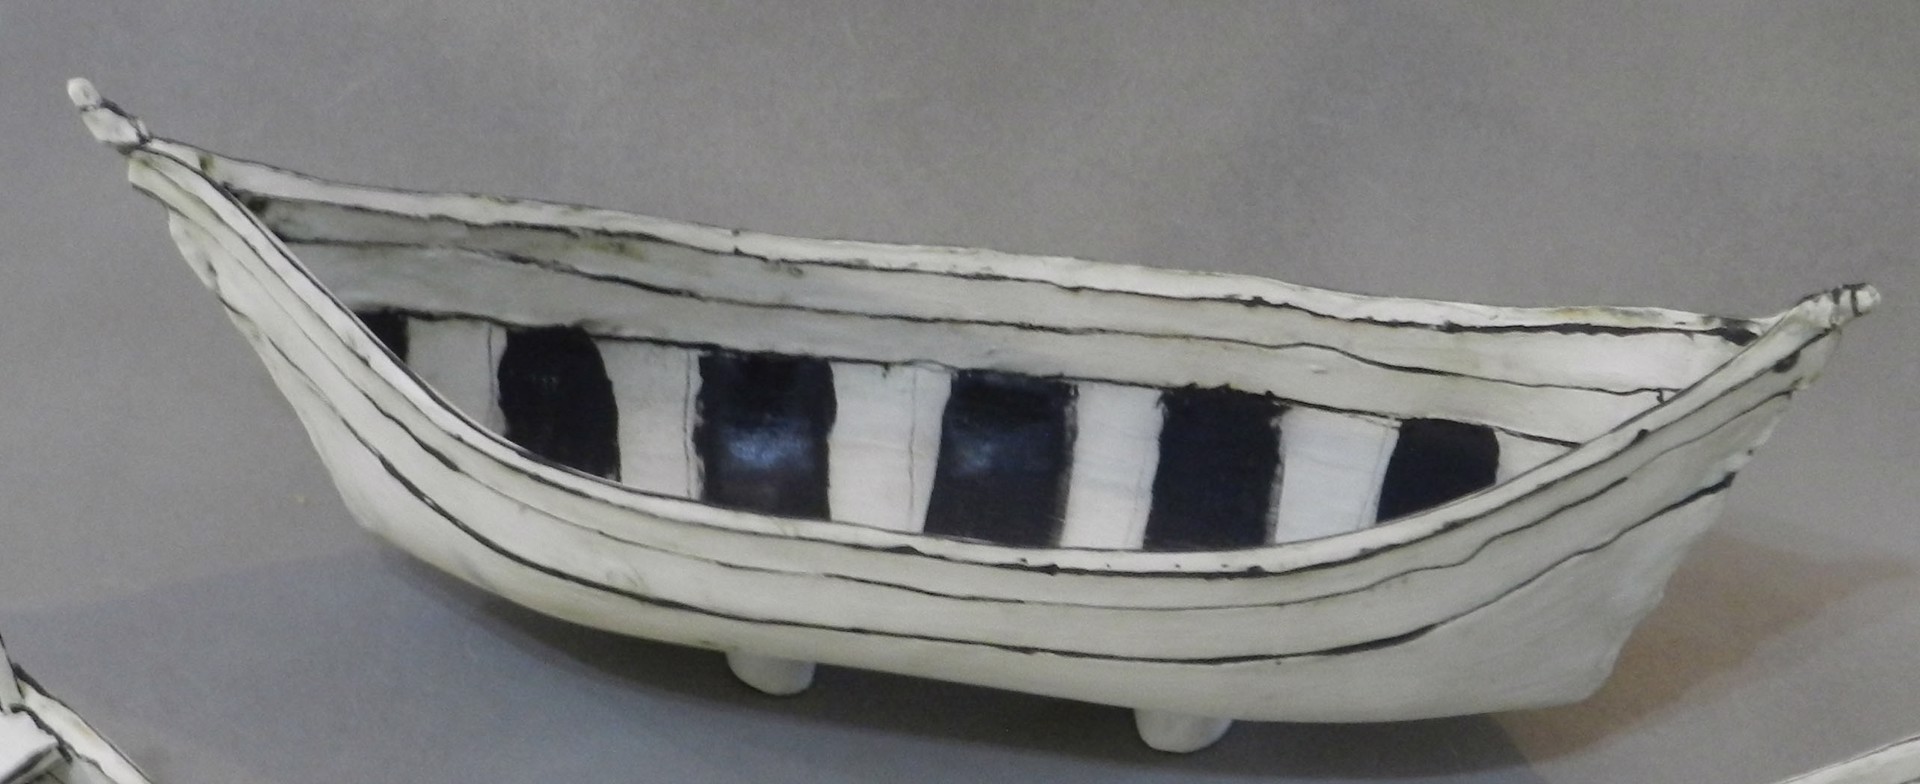 SOLD - Large White Boat by Mary Fischer